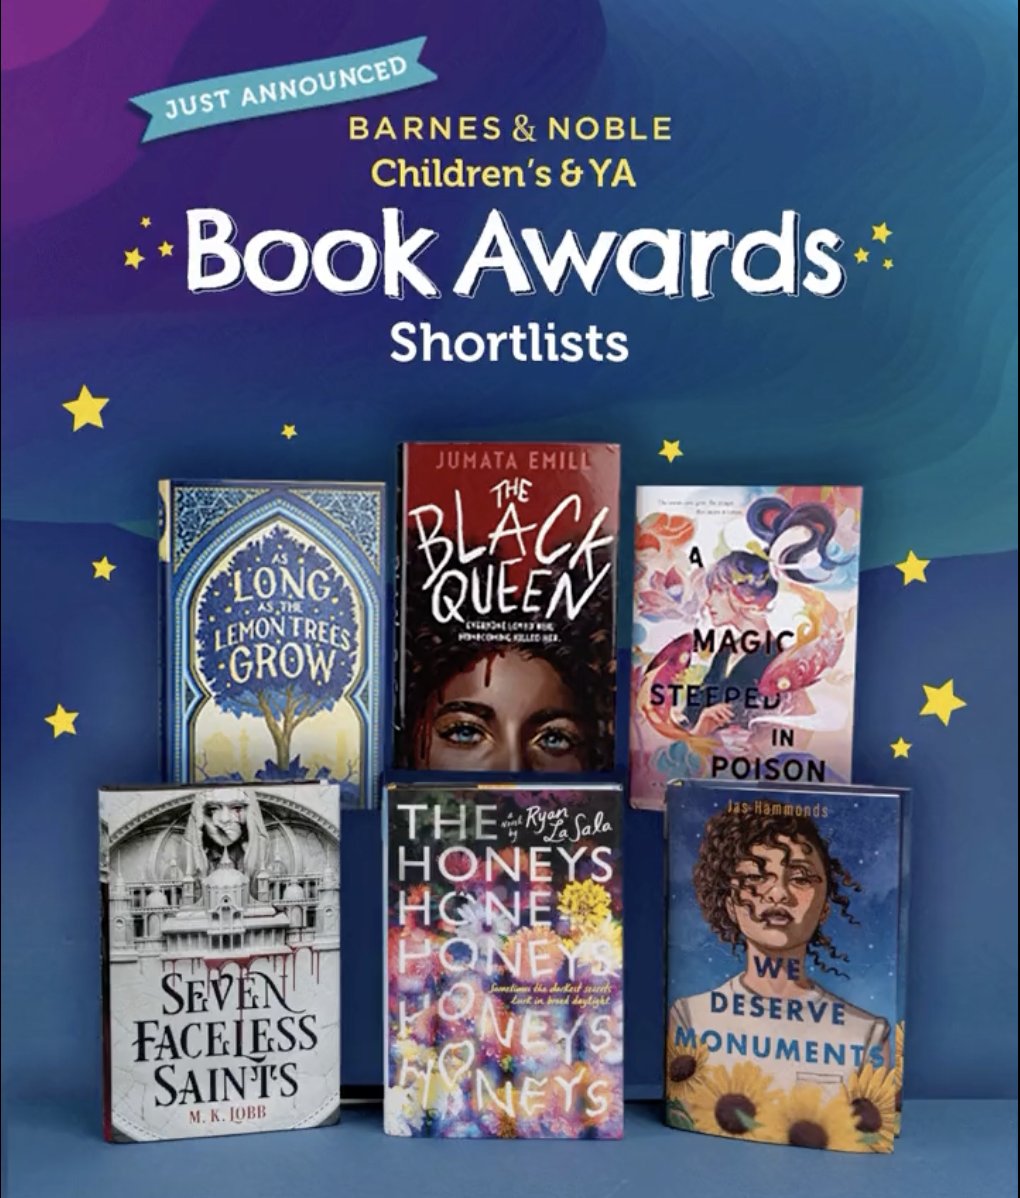 *deep breath* THE HONEYS has made the 2023 Shortlist for the Barnes & Noble YA Book Awards. A horror novel about a genderfluid teen dealing with grief, destroying binaries, and befriending murderous hot-girl beekeepers made the shortlist. I'm 🤩😭🥲✨🤠! bn.com/BookAwards